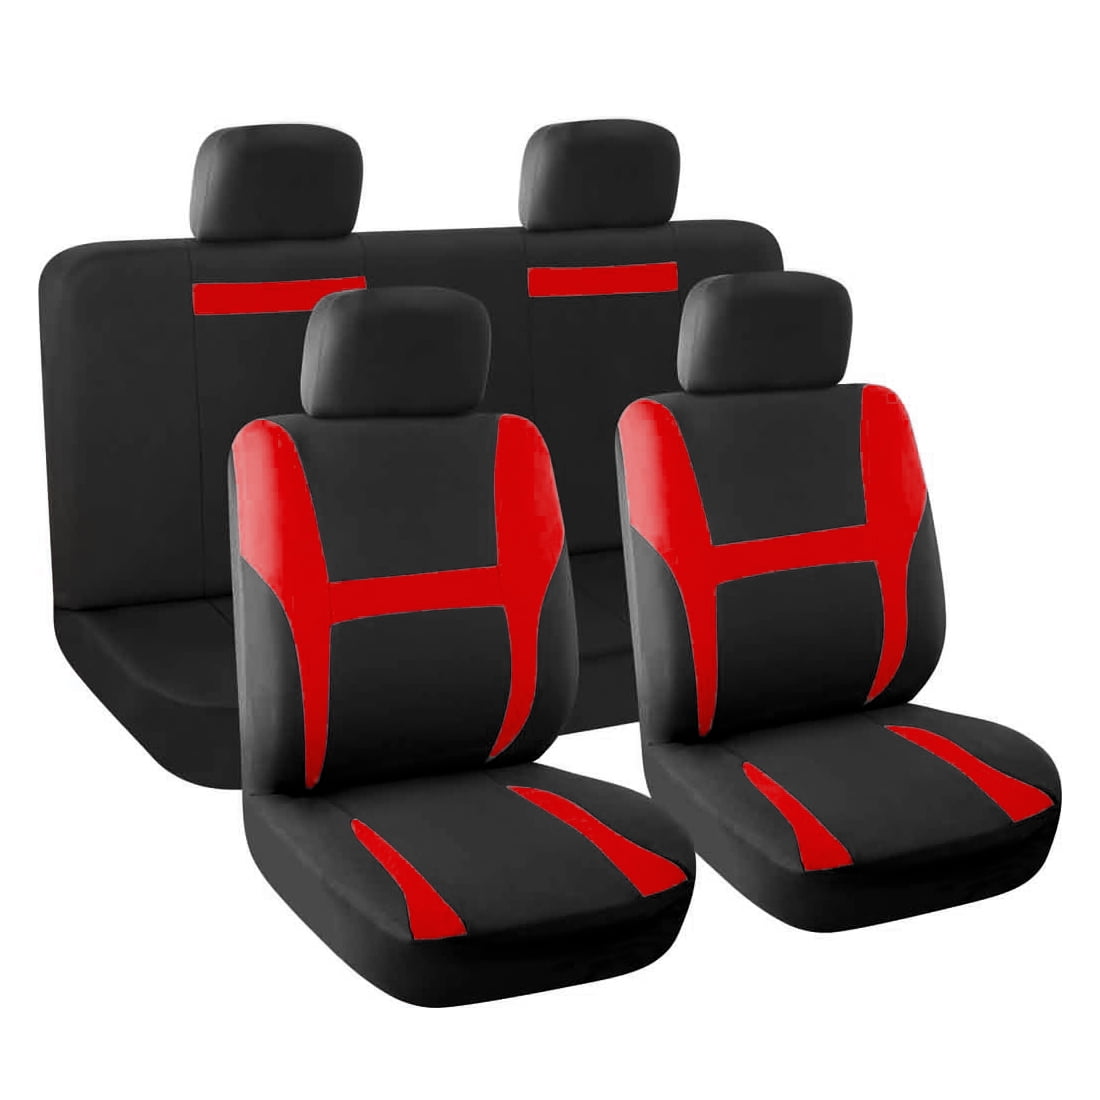 red seat covers walmart